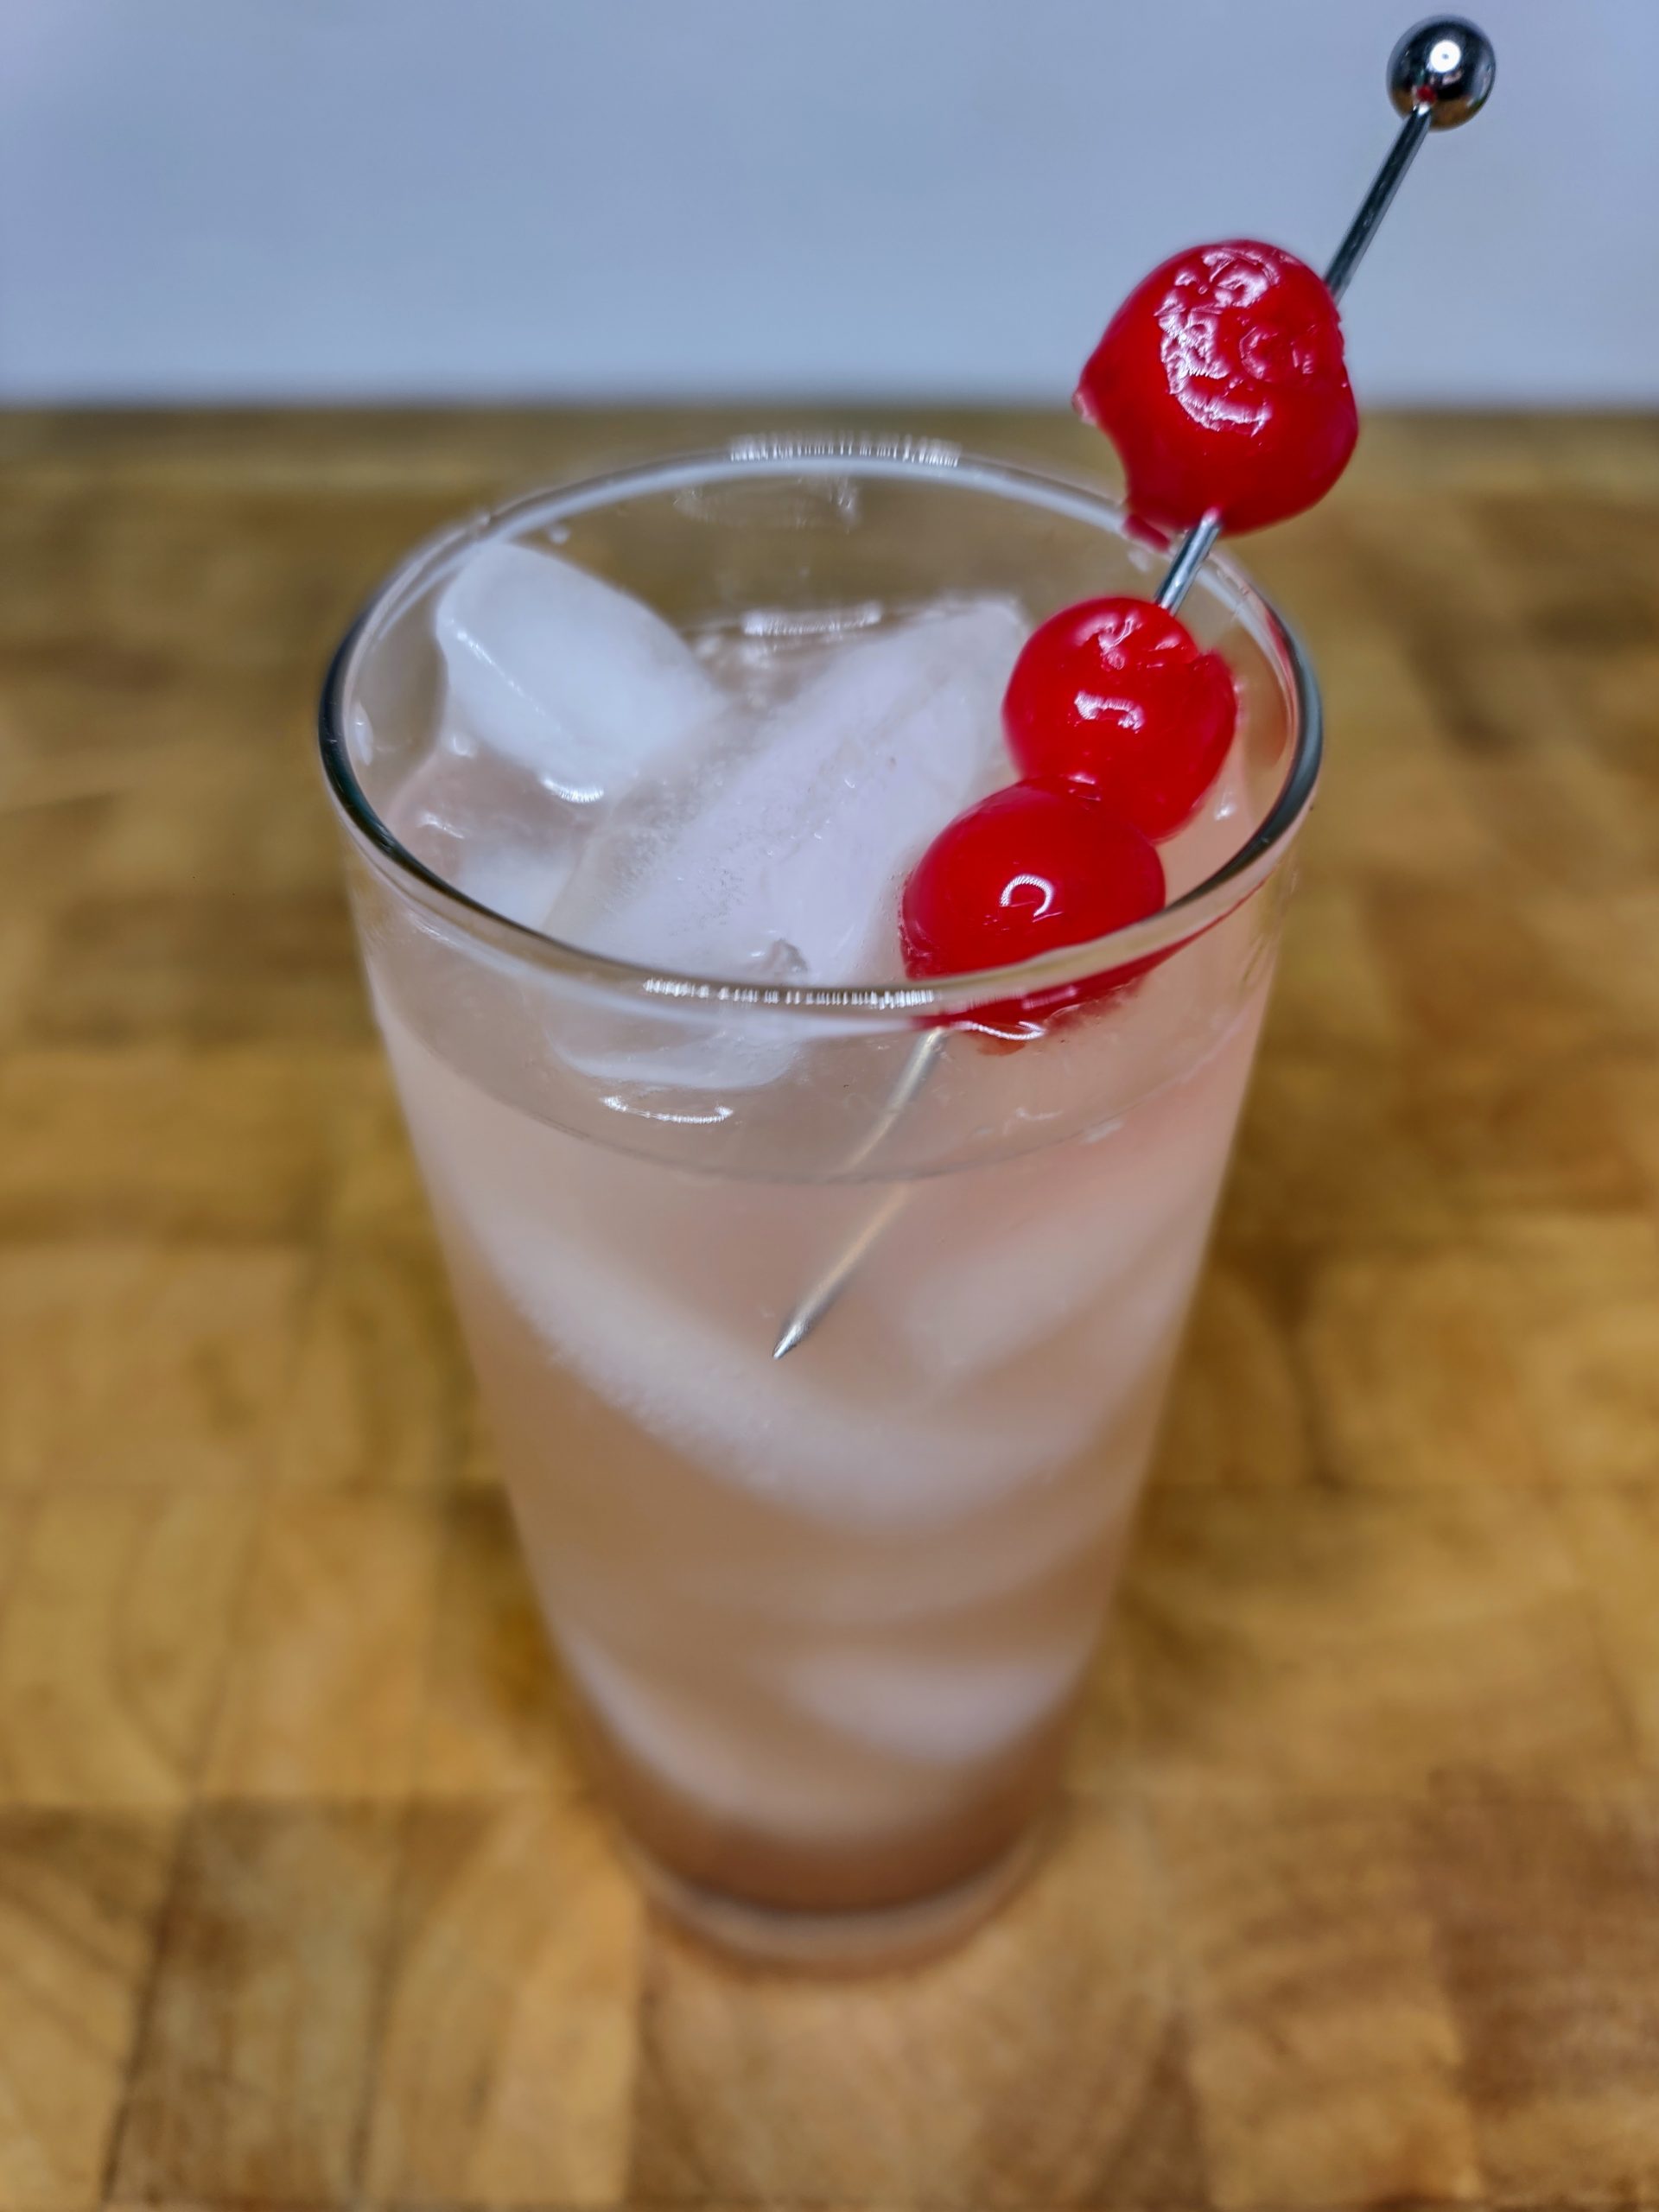 hunch punch in a glass with cherry garnish